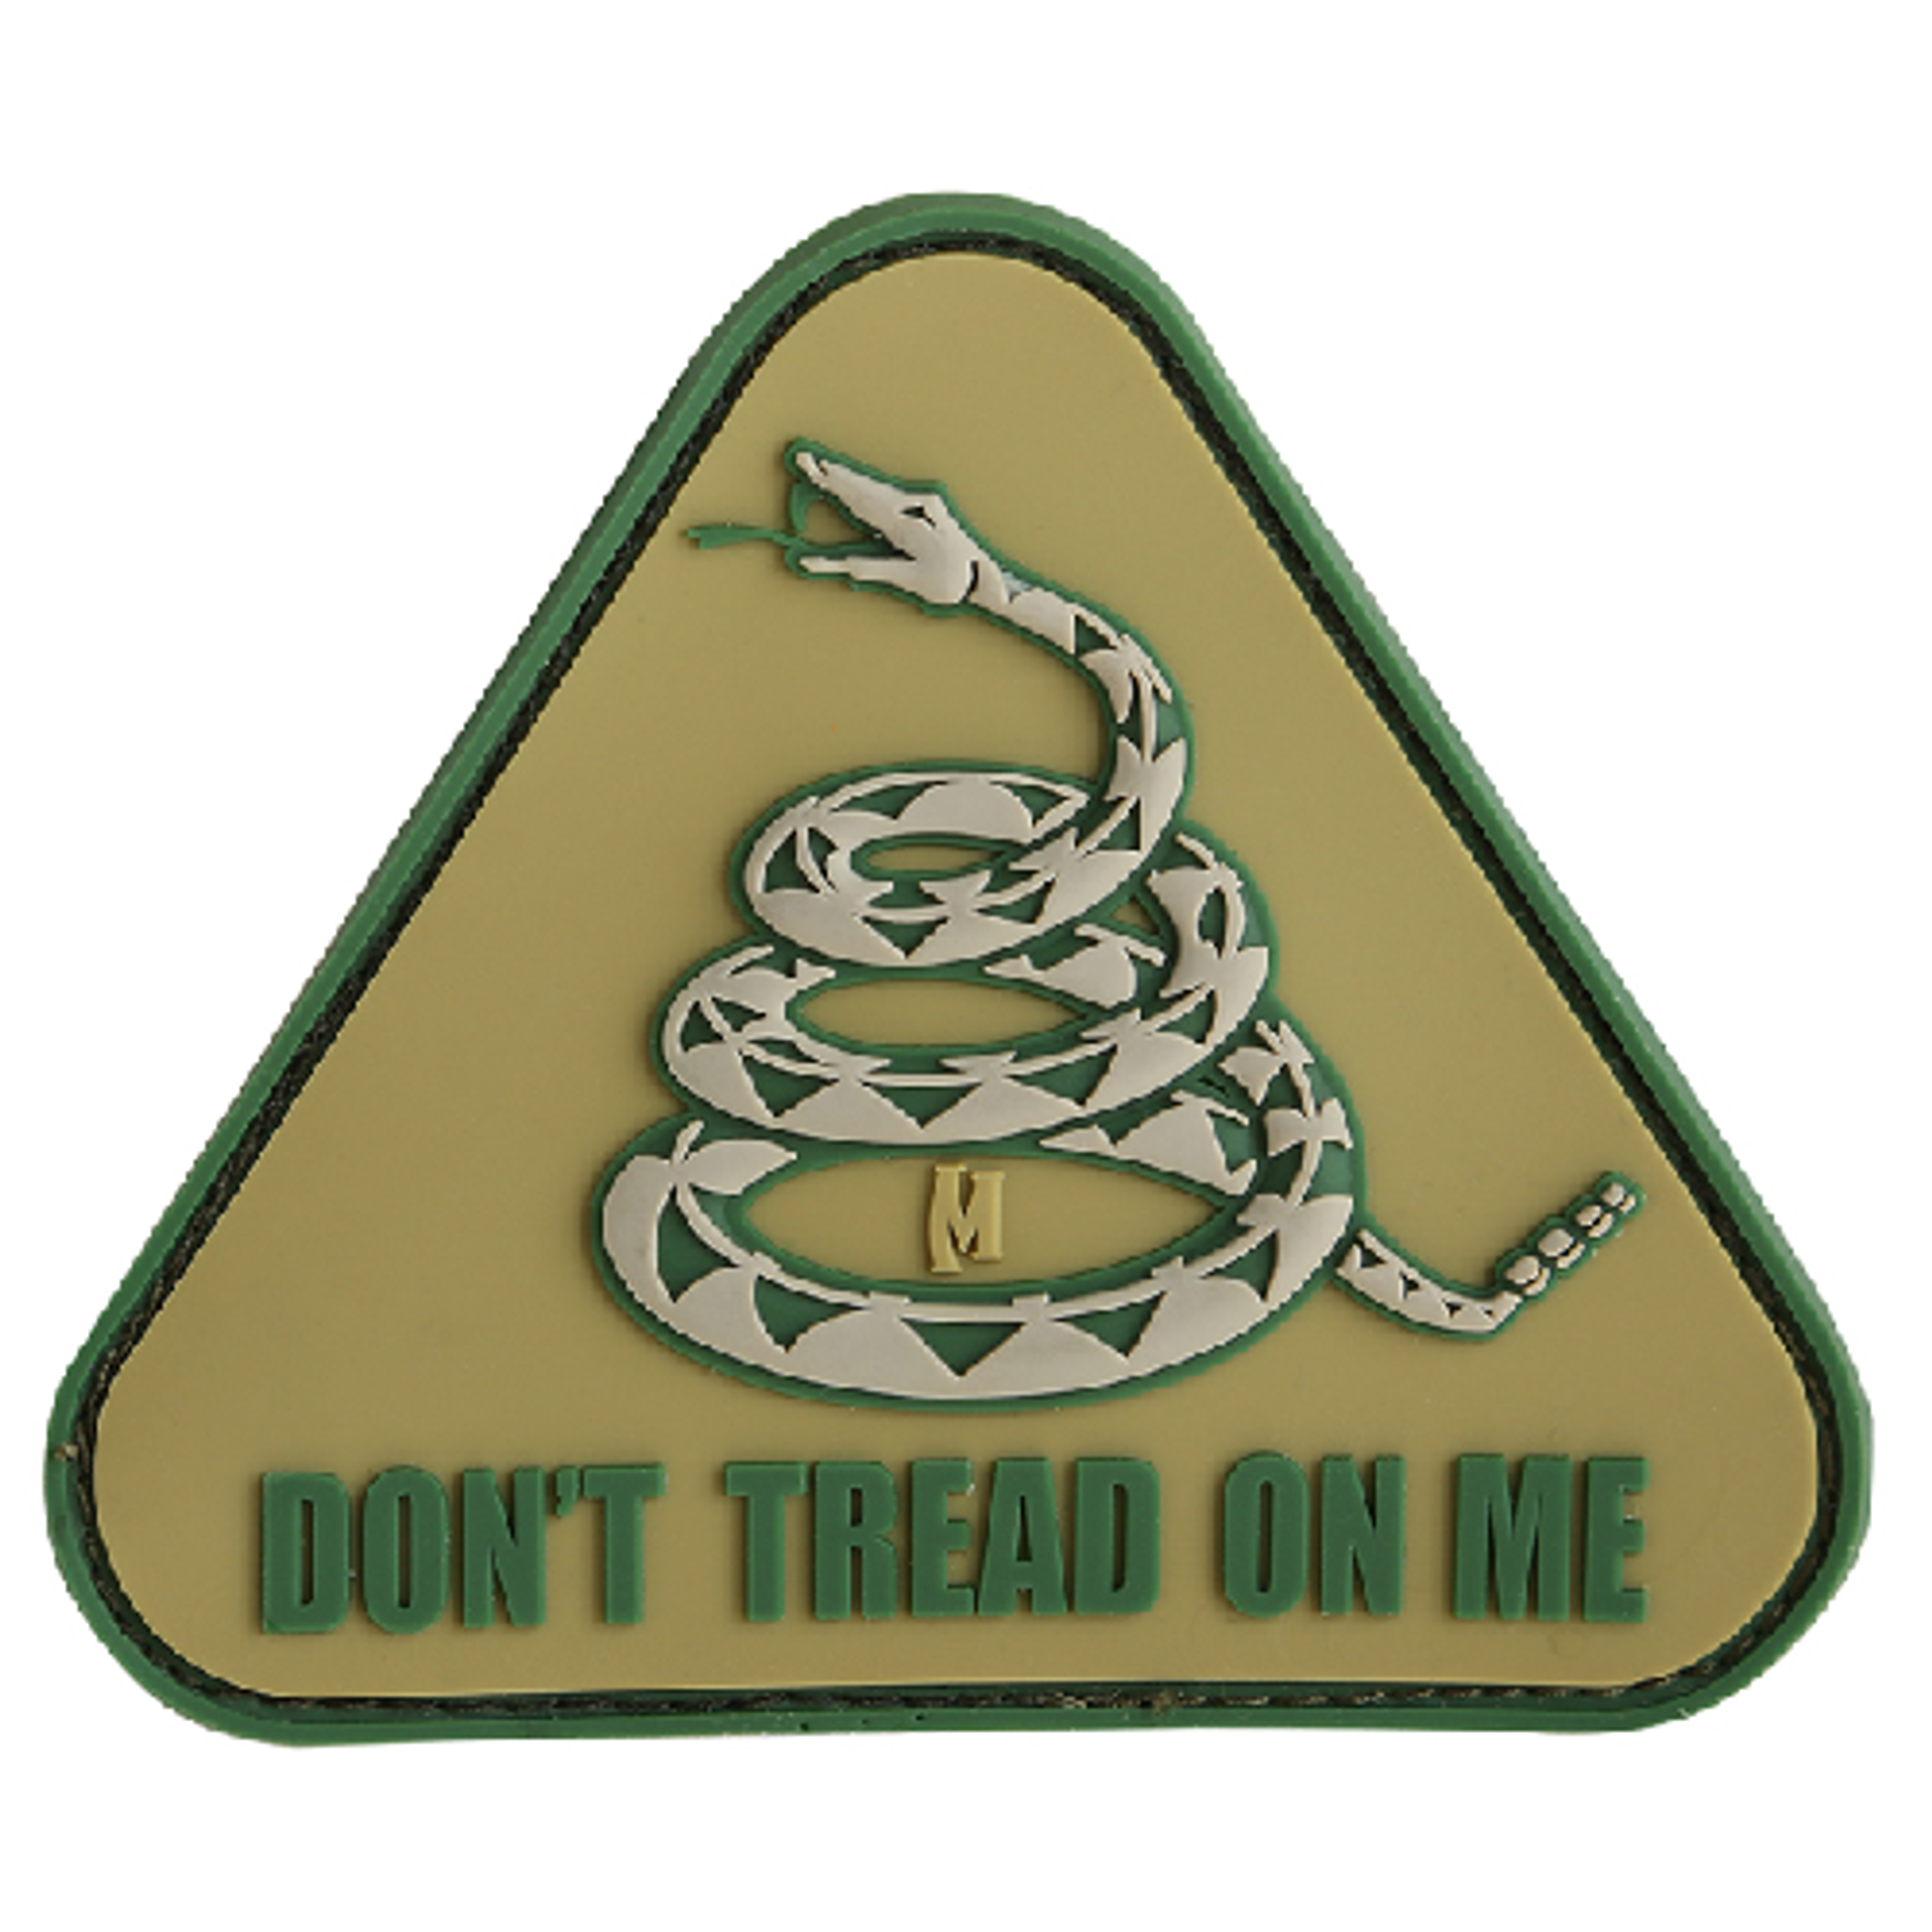 Don't Tread On Me Morale Patch - KRMXP-PVCPATCH-DTOMA